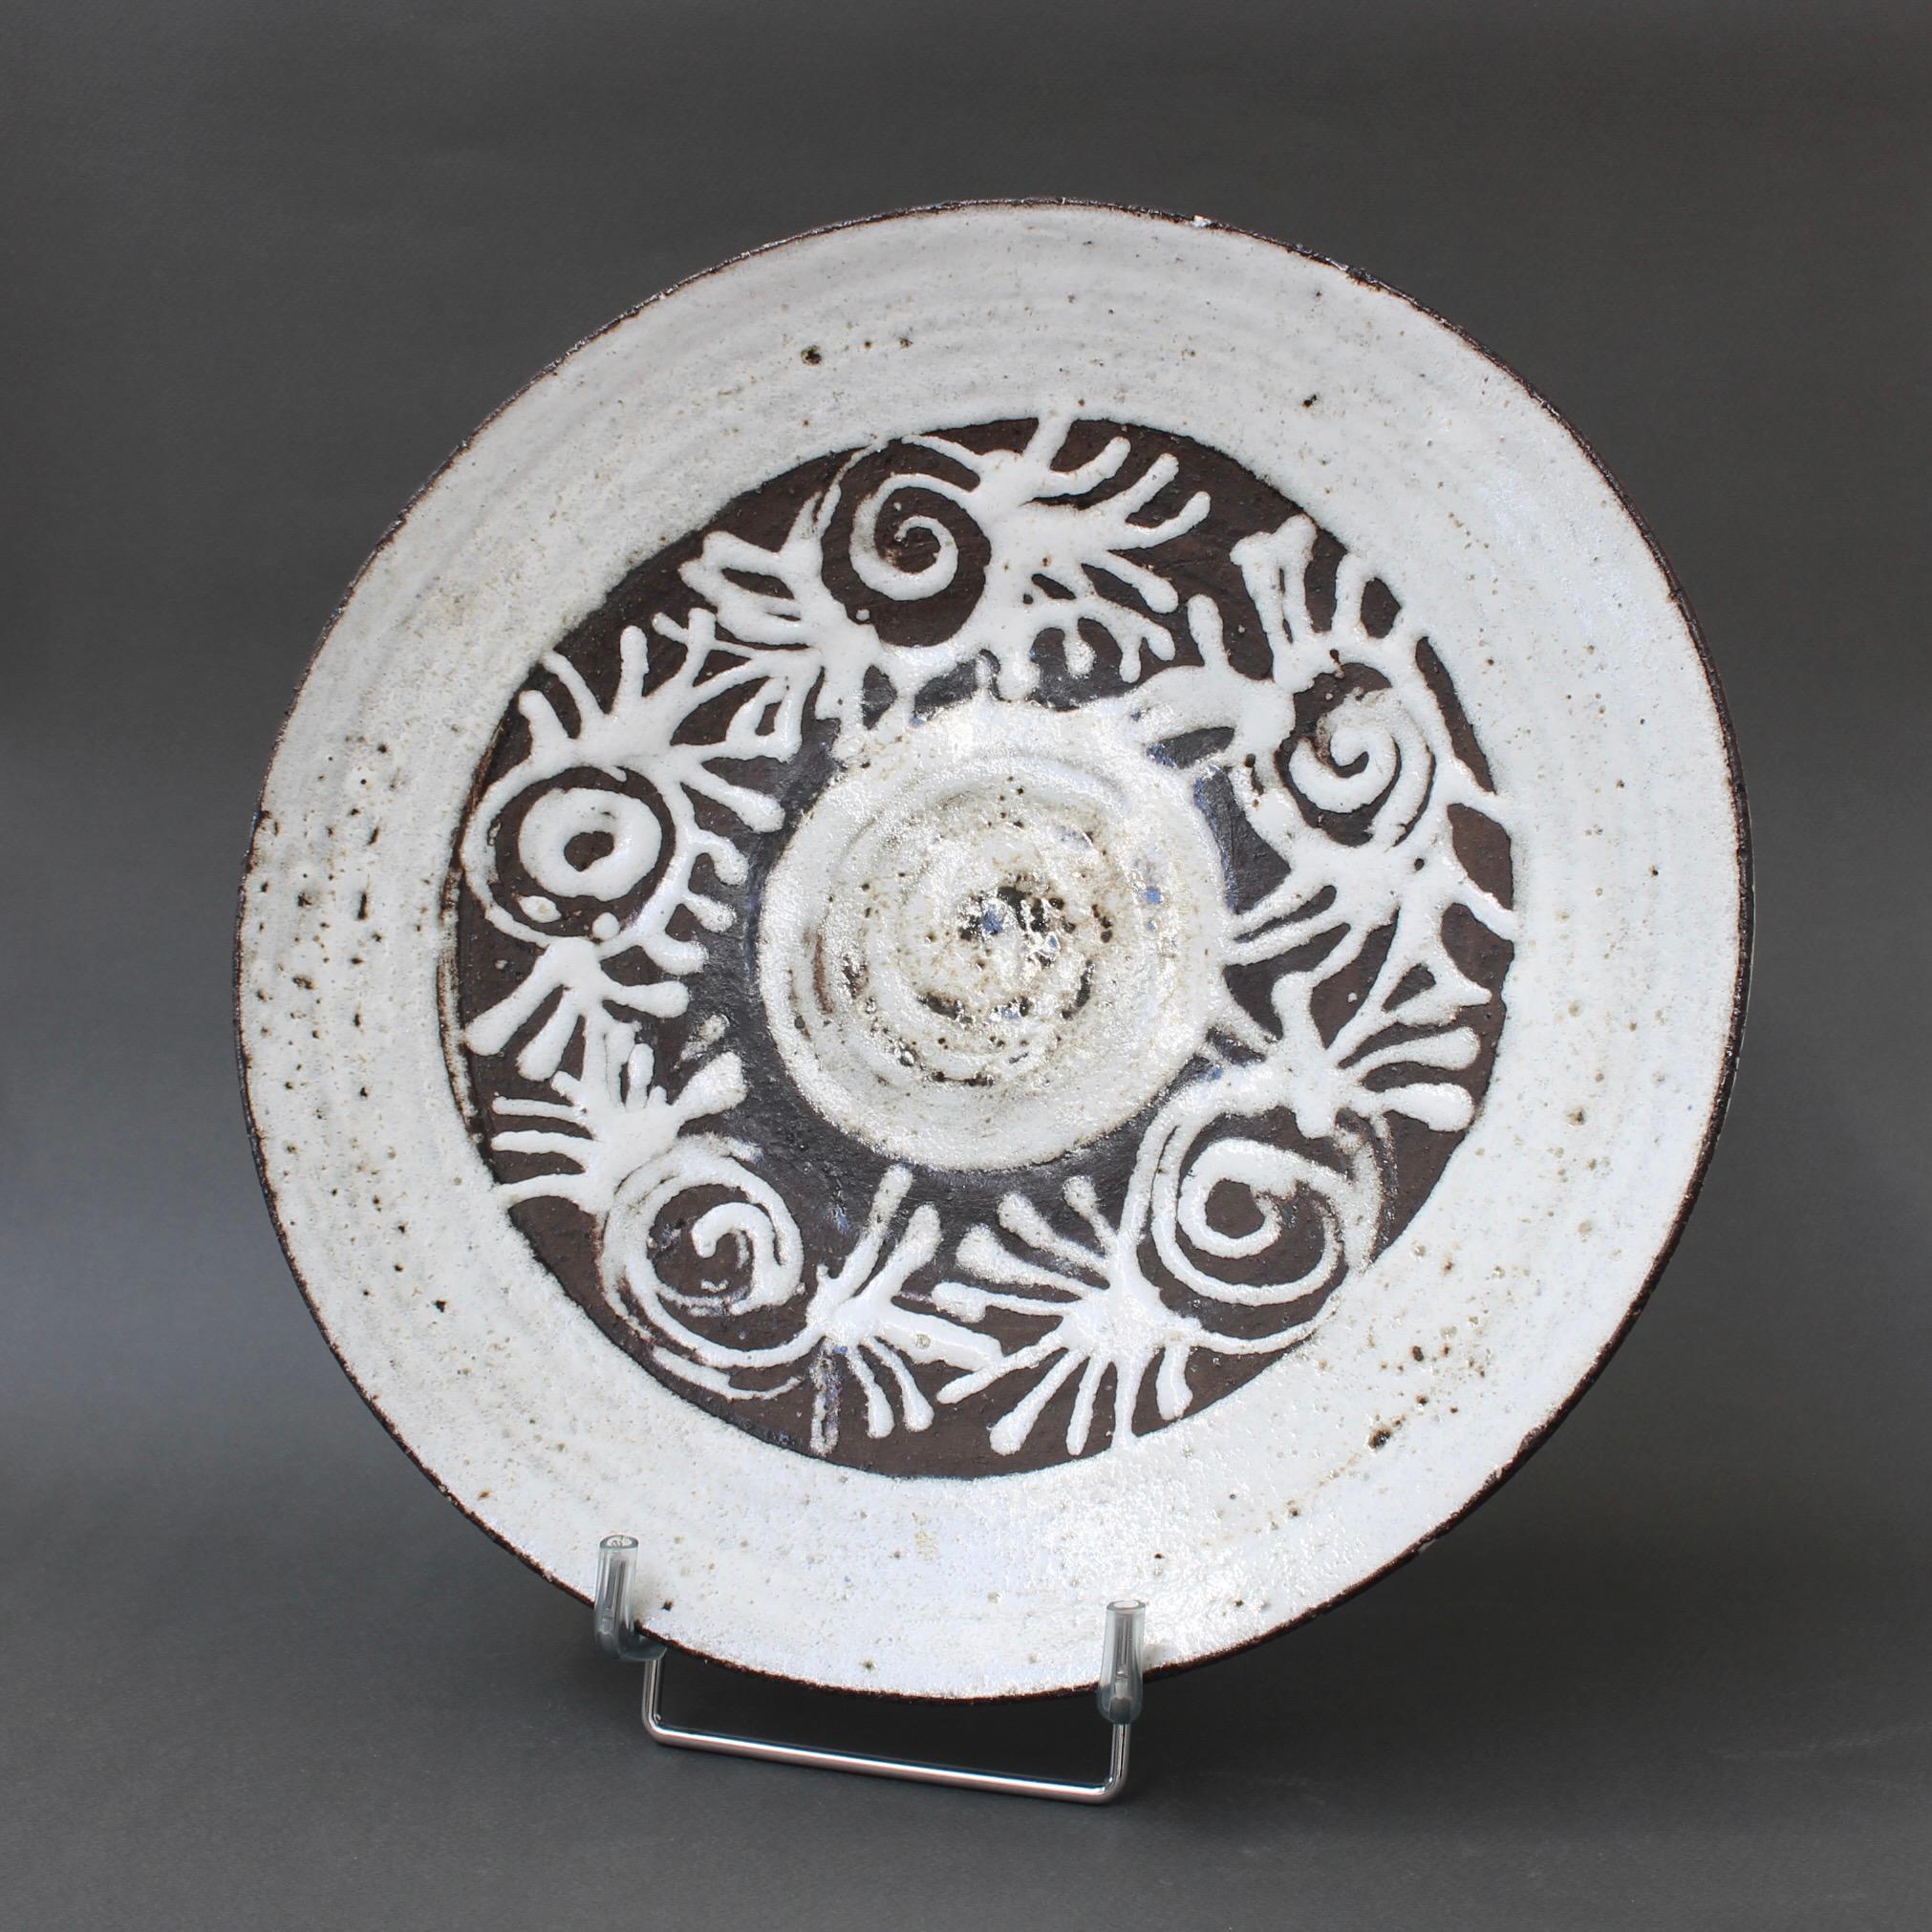 Mid-century platter (circa 1960s) by Albert Thiry. A milky-white glaze graces the outer portion of the decorative surface. The inner decor is abstract, incised with a dark chocolate brown and white stylised foliage motif. Although it is not Thiry's